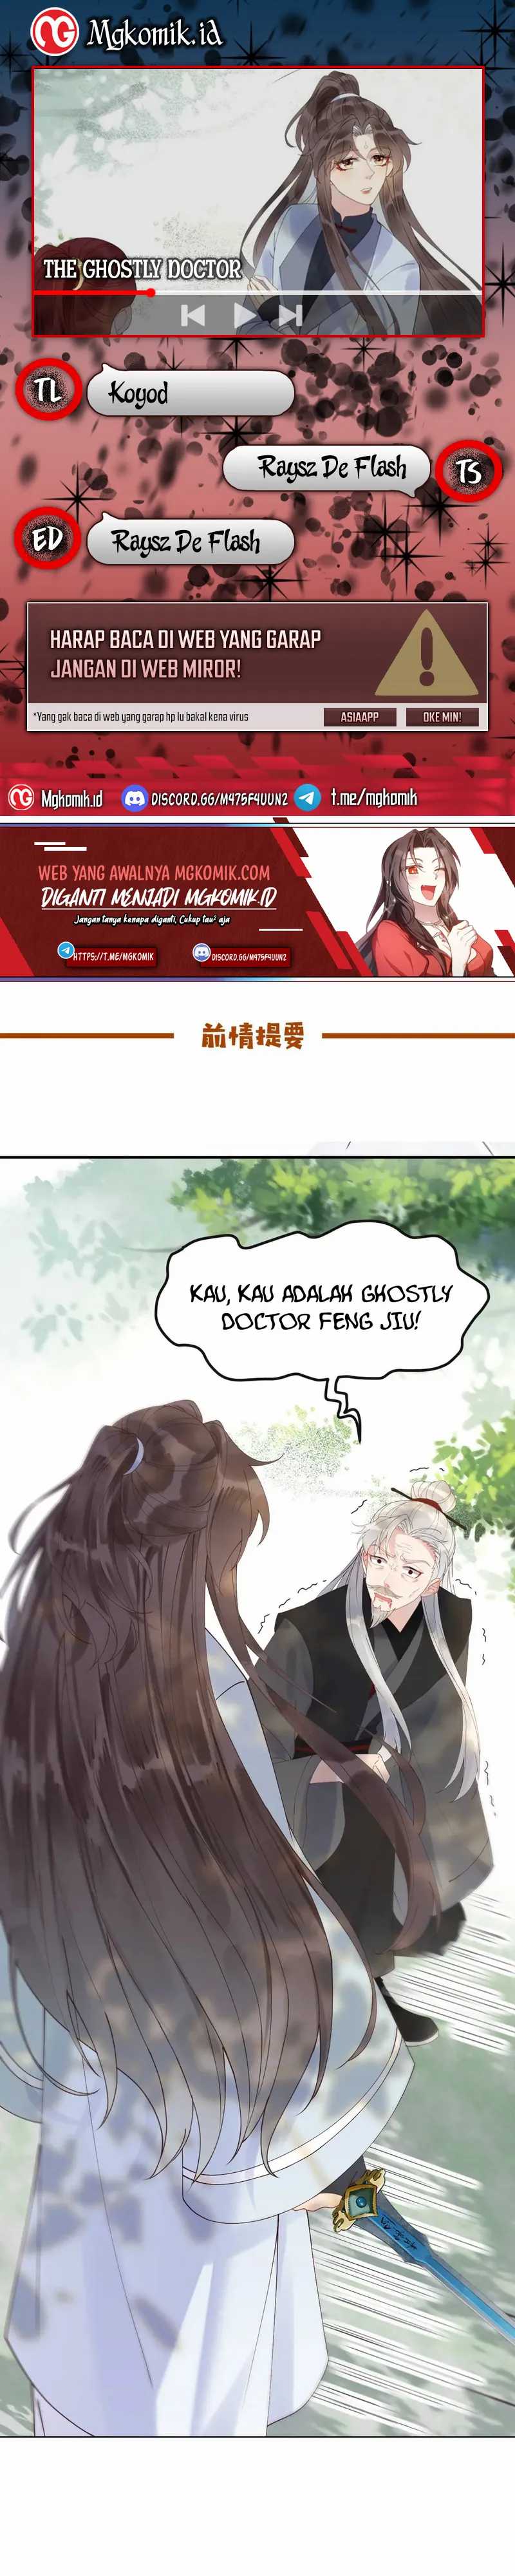 The Ghostly Doctor: Chapter 605 - Page 1